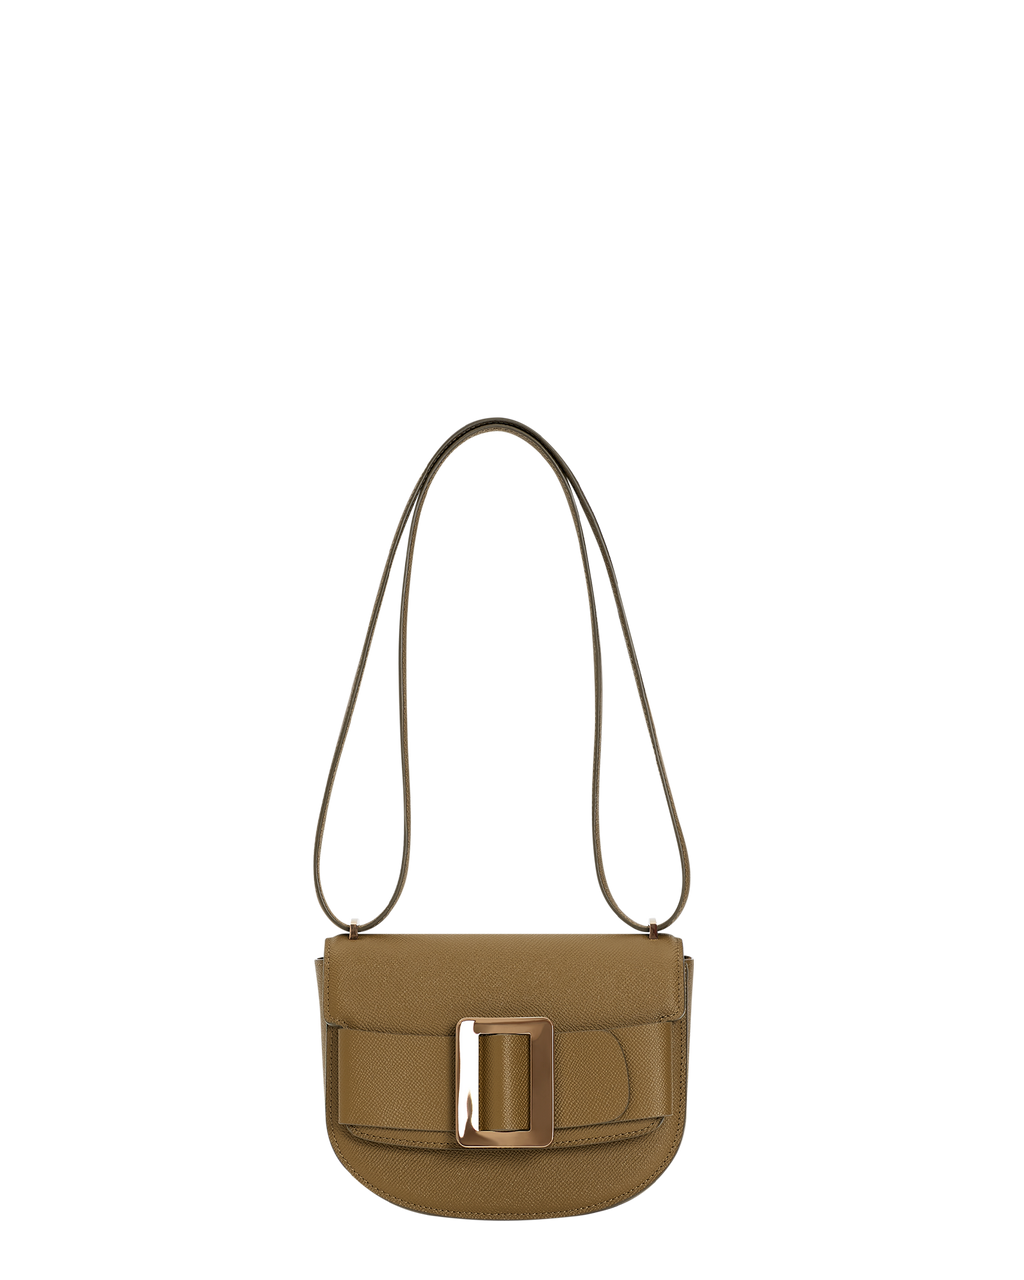 BOYY Pouchette Buckle Detailed Chained Shoulder Bag